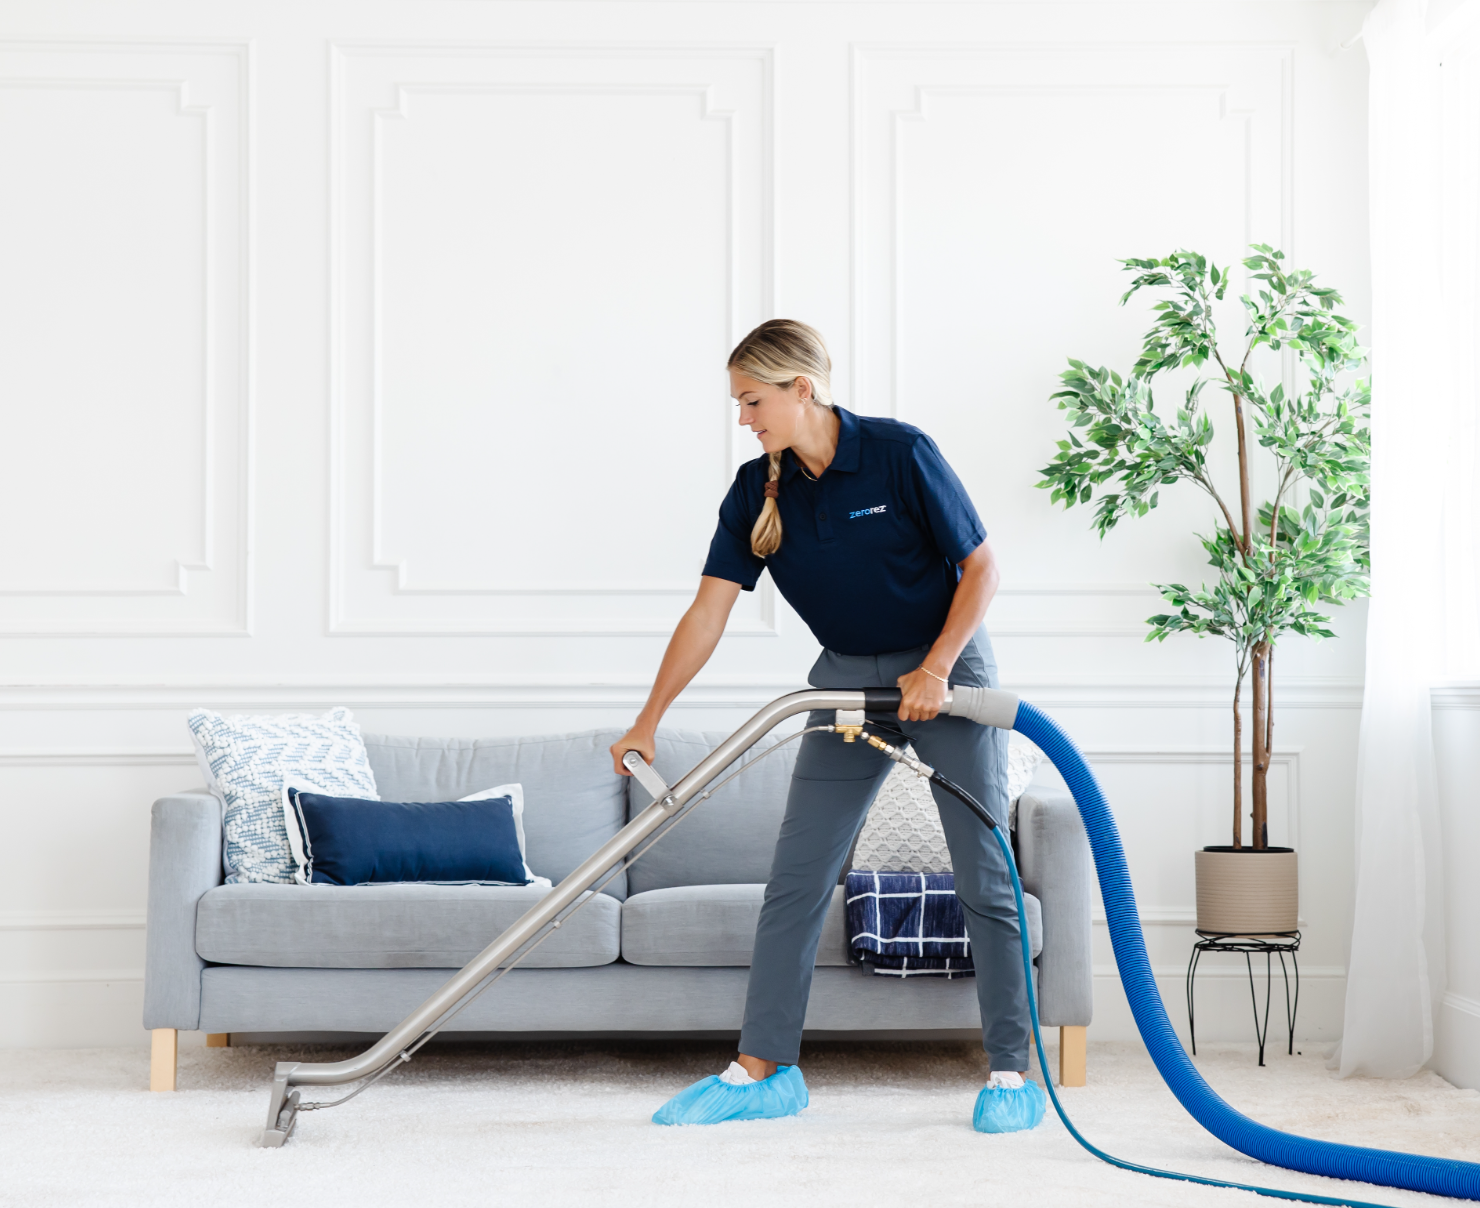 Pricing For Carpet Cleaning